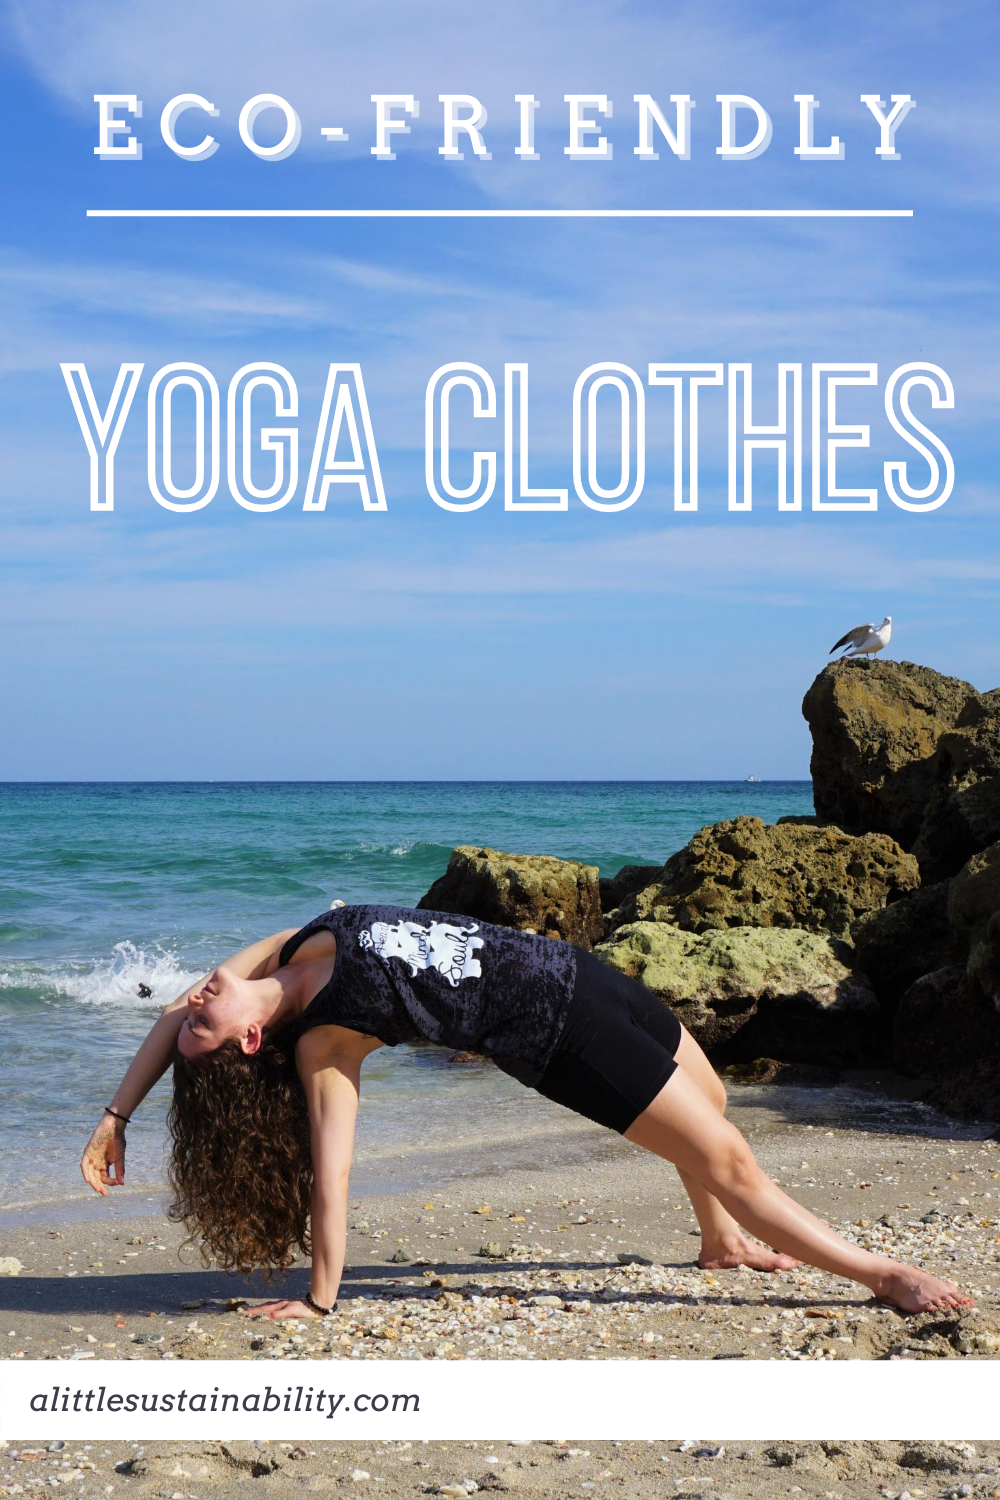 Eco Friendly clothing brands with beautiful yoga lines. Take your conscious yoga practice to the next level with sustainable activewear. Find more sustainability blogs at alittlesustainability.com